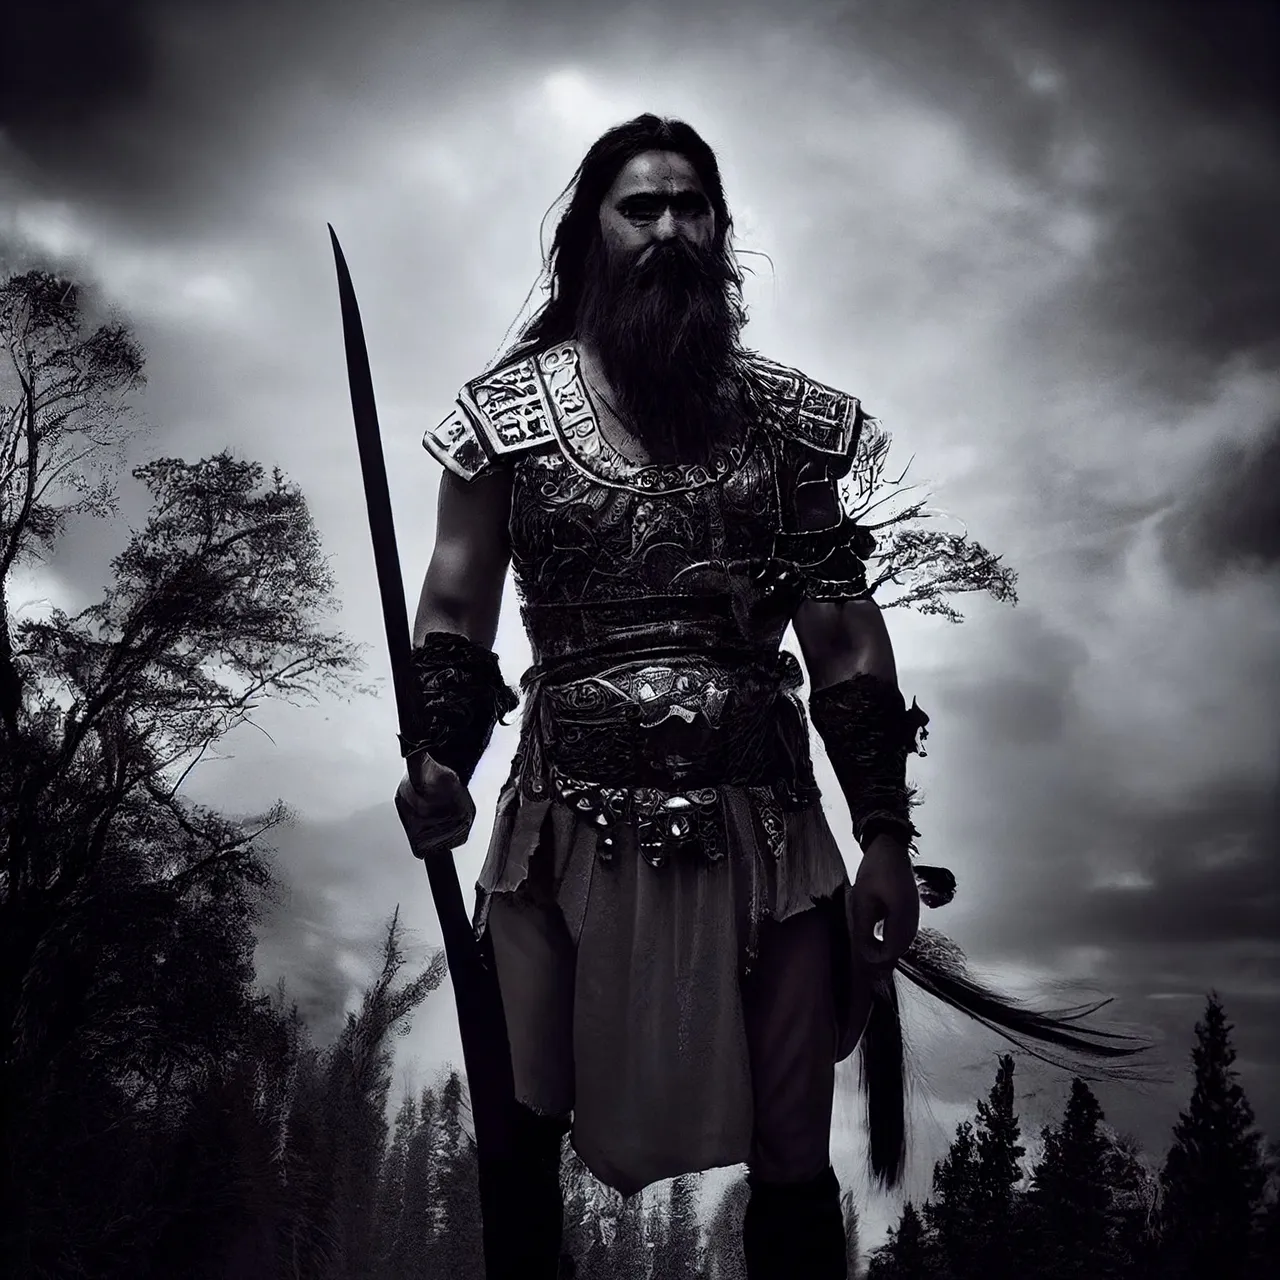 Ed_Privat_photograph_ancient_mythical_warrior_with_giant_sword__43df2ac2-5941-491f-8d31-bd38605c6094.png